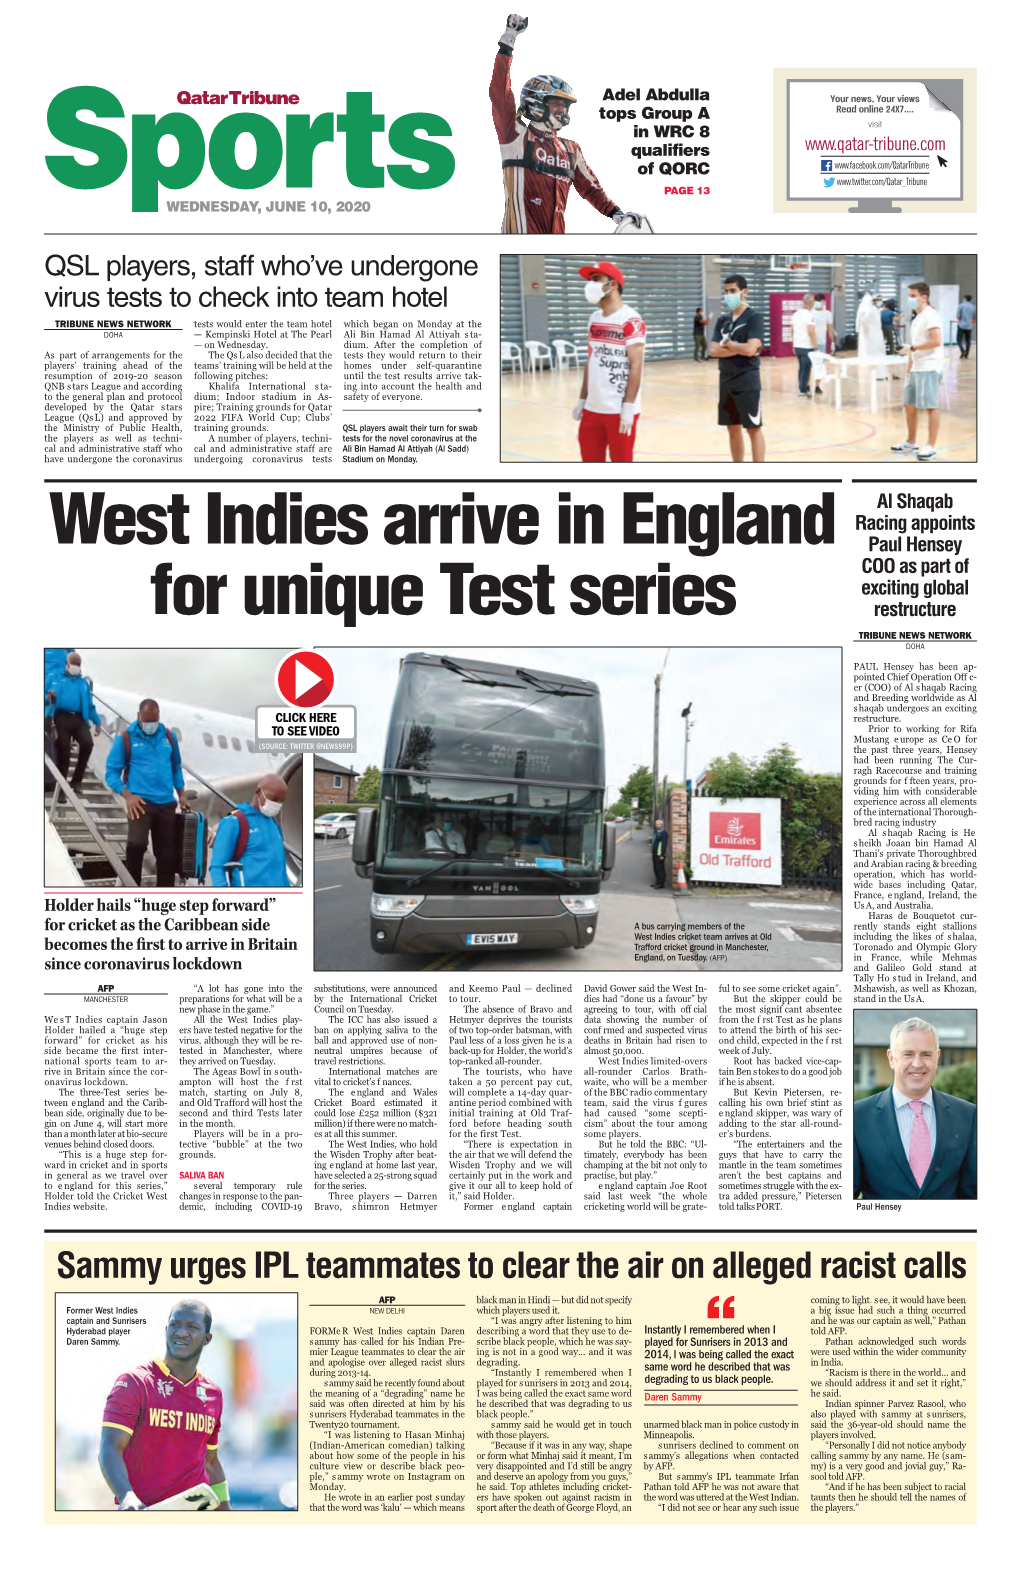 West Indies Arrive in England for Unique Test Series